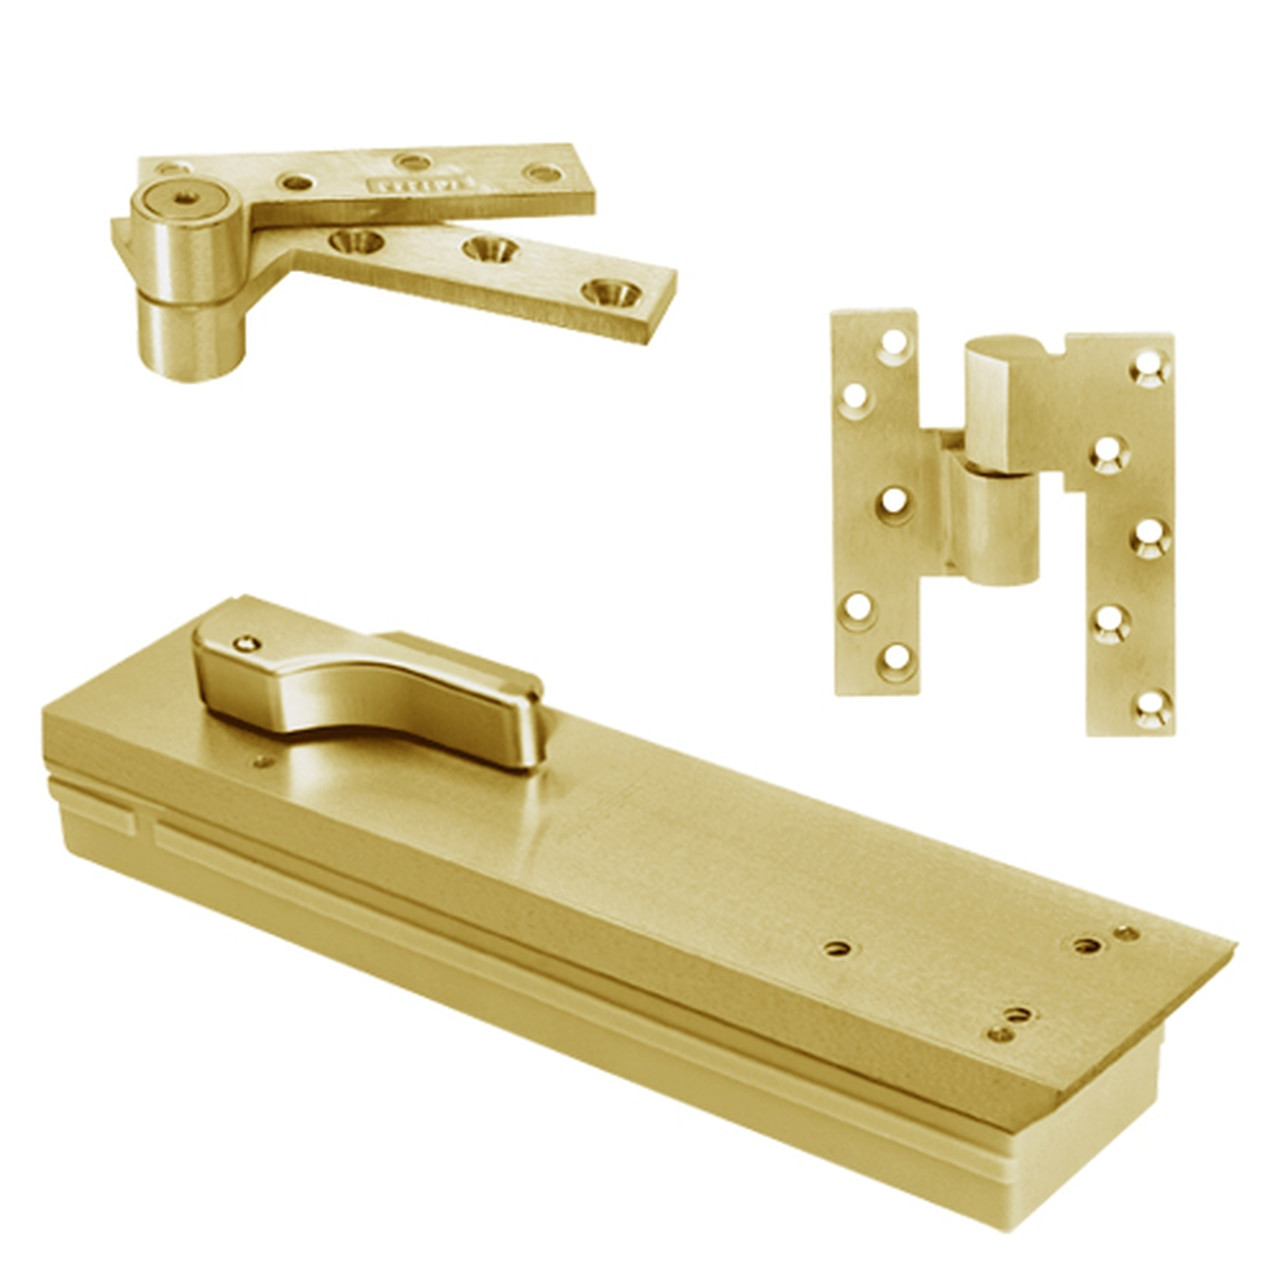 FQ5104NBC-LCC-LH-606 Rixson Q51 Series Fire Rated 3/4" Offset Hung Shallow Depth Floor Closers in Satin Brass Finish